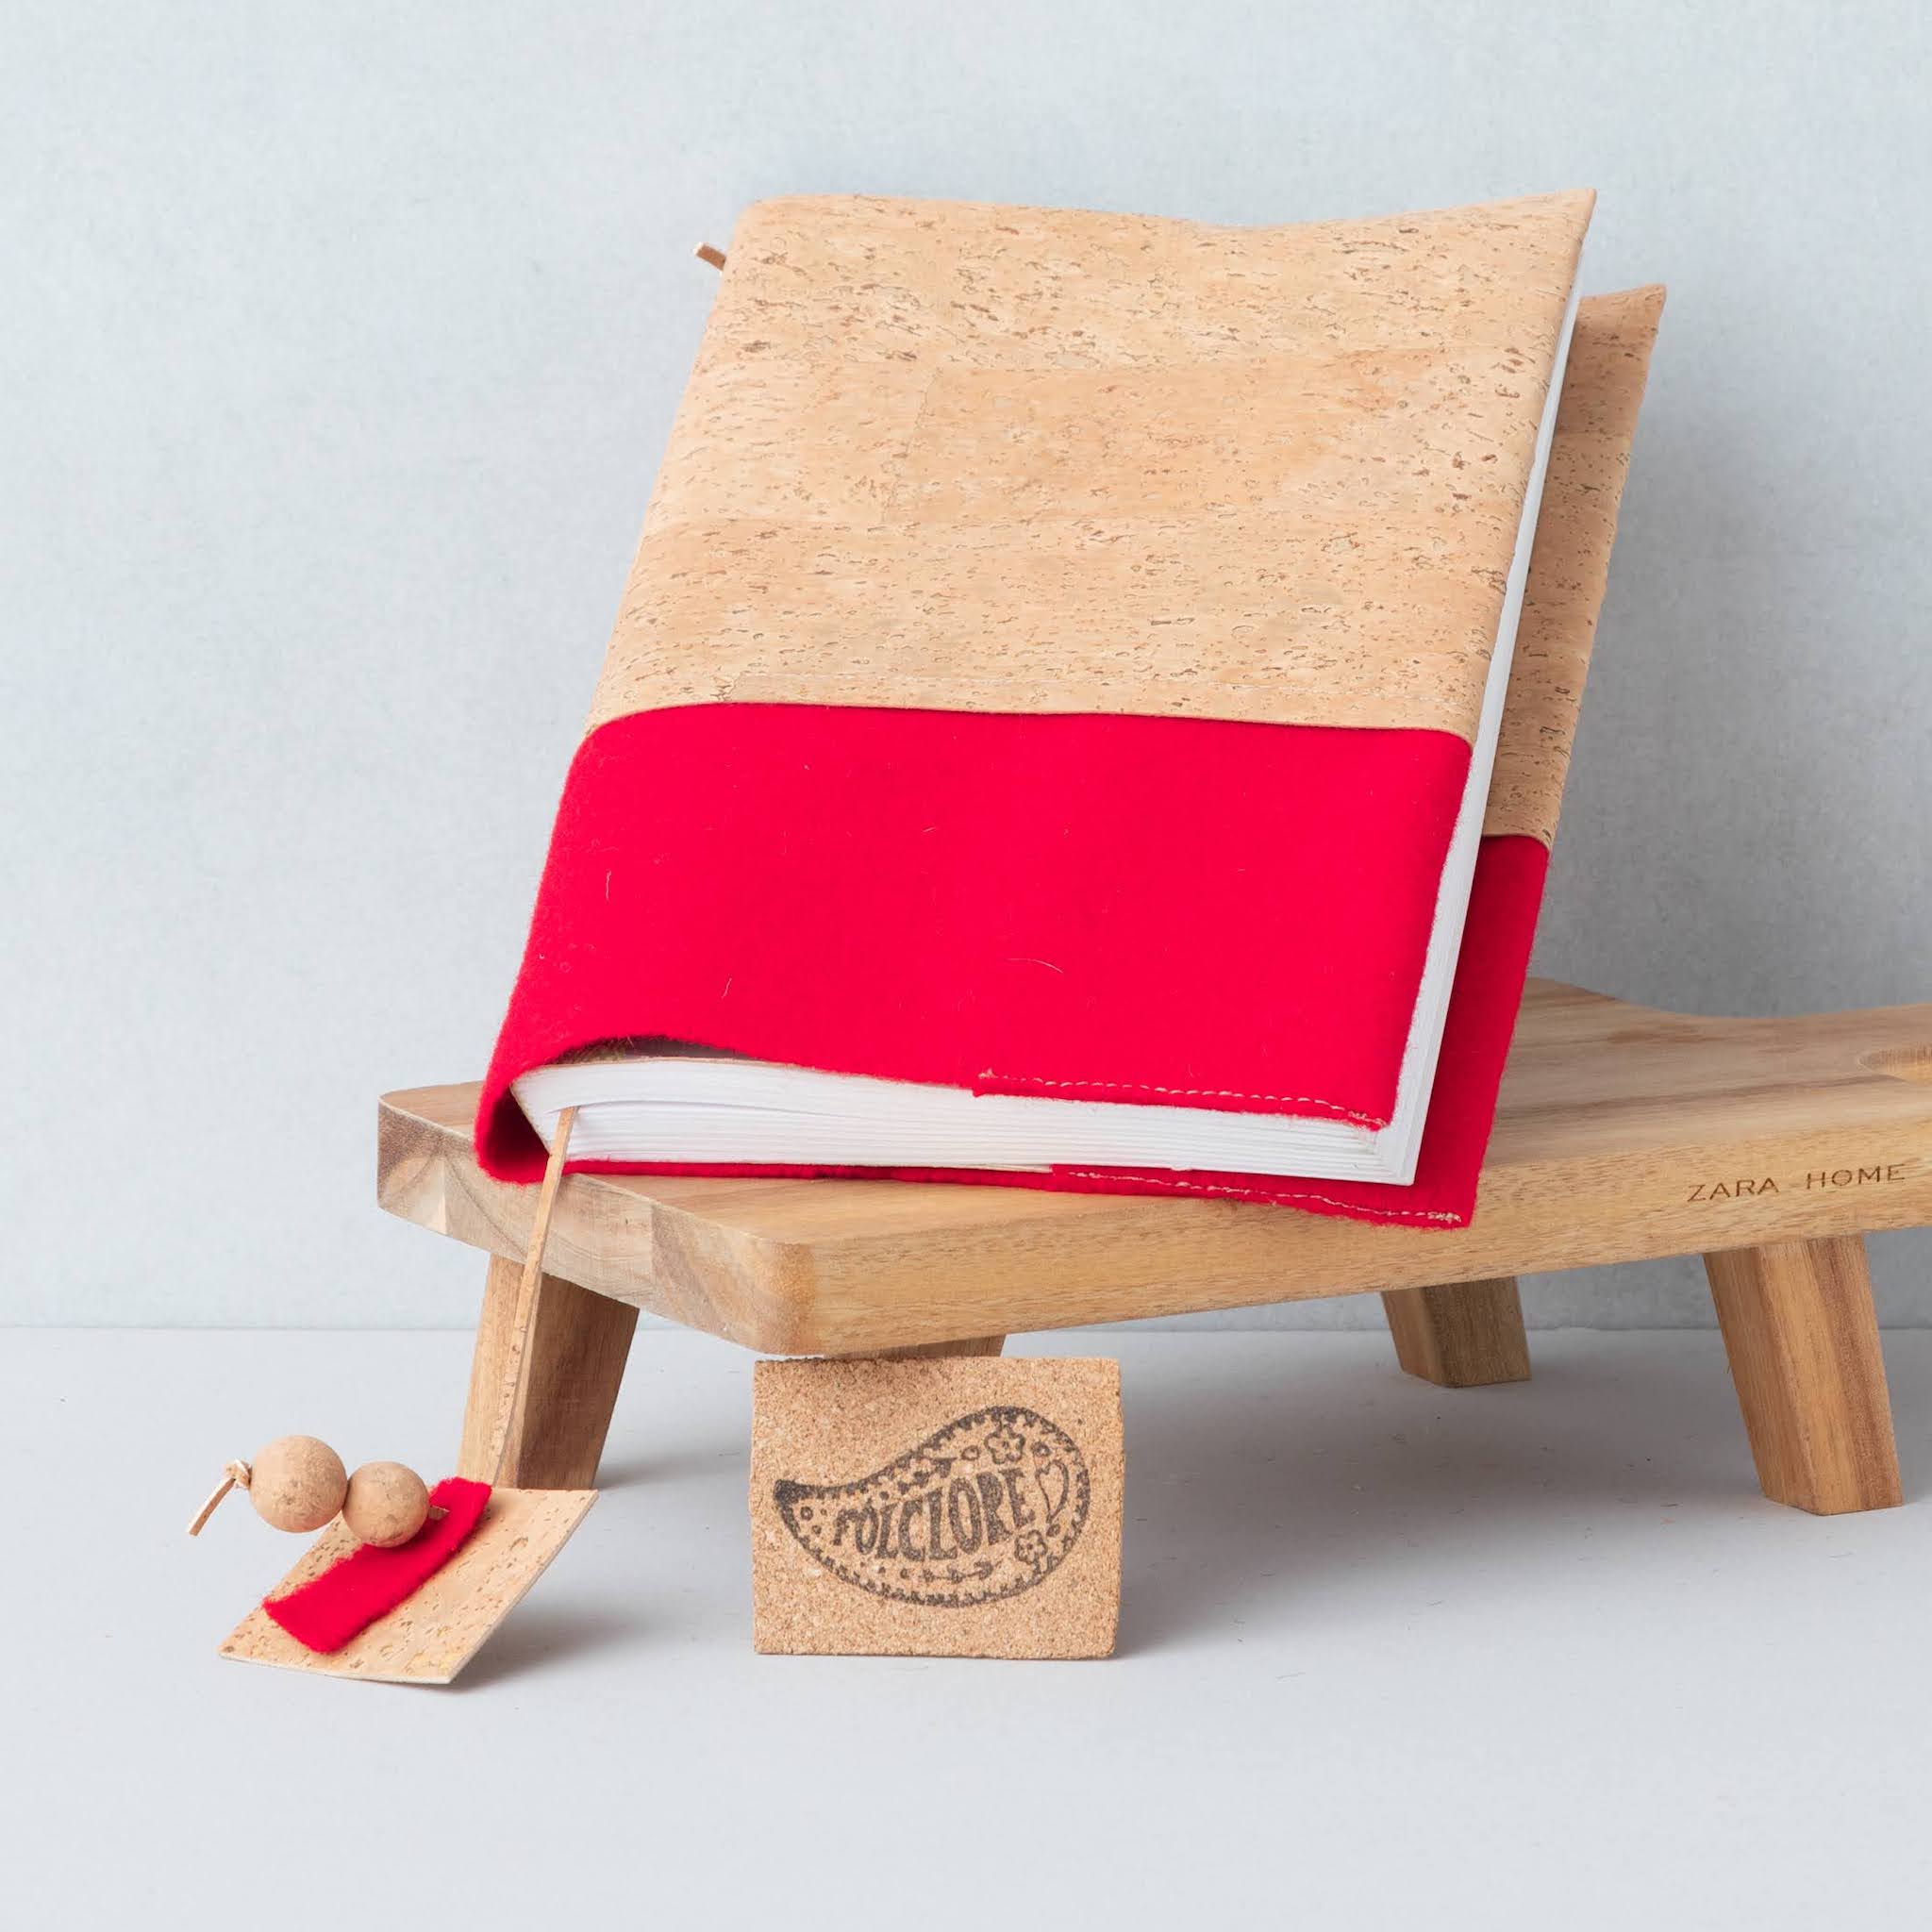 eco-friendly Portuguese gift crafted from burel and cork fabric